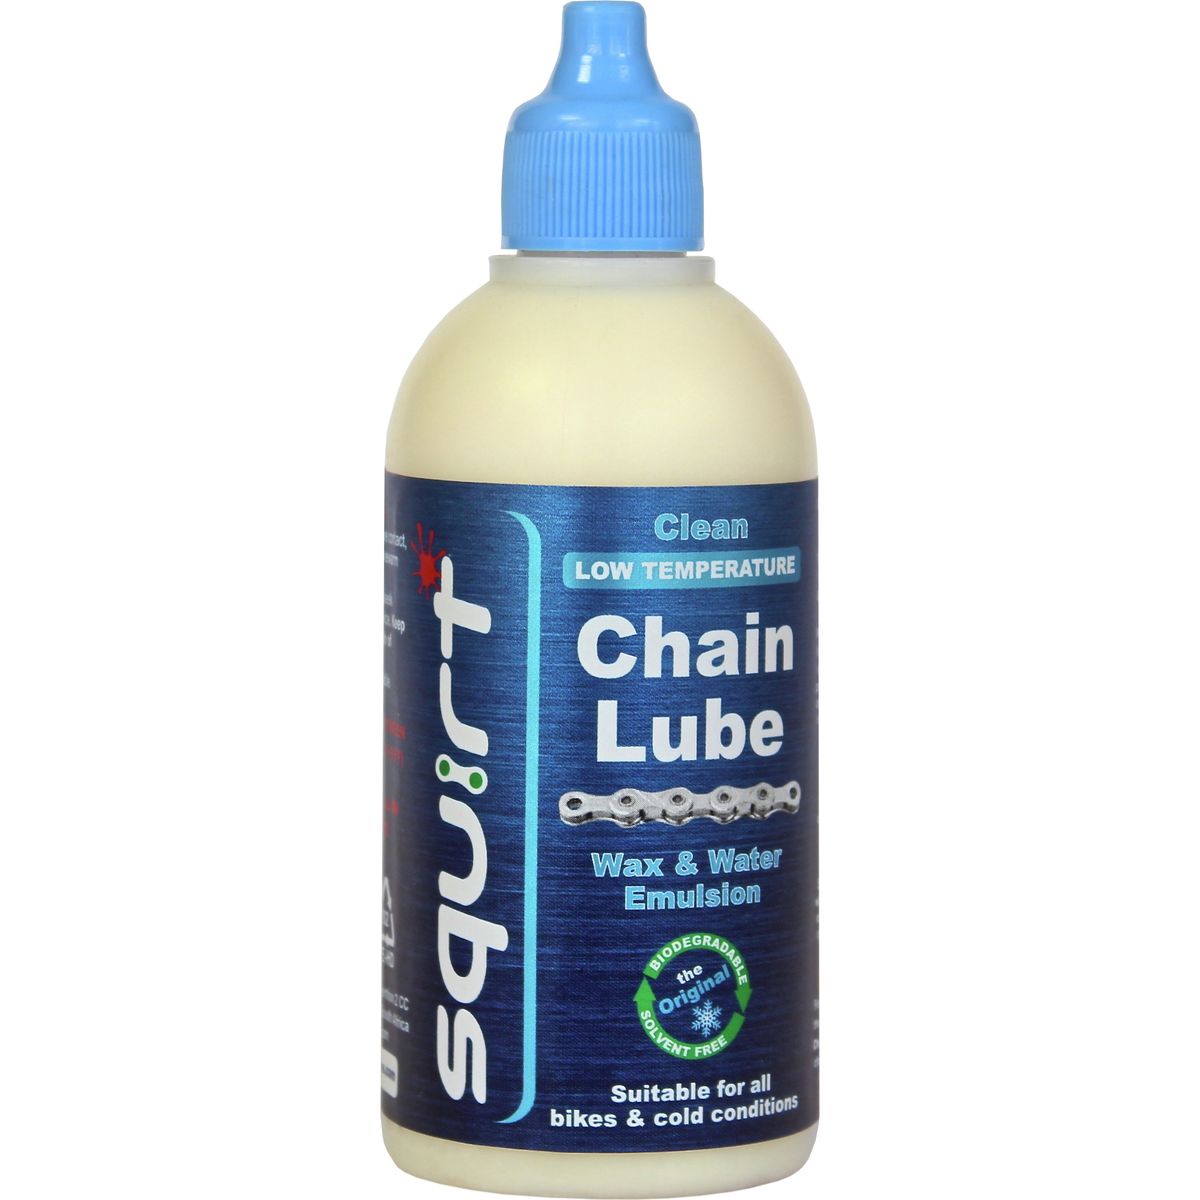 Squirt Lube Low Temp Chain Lube One Color, 4oz